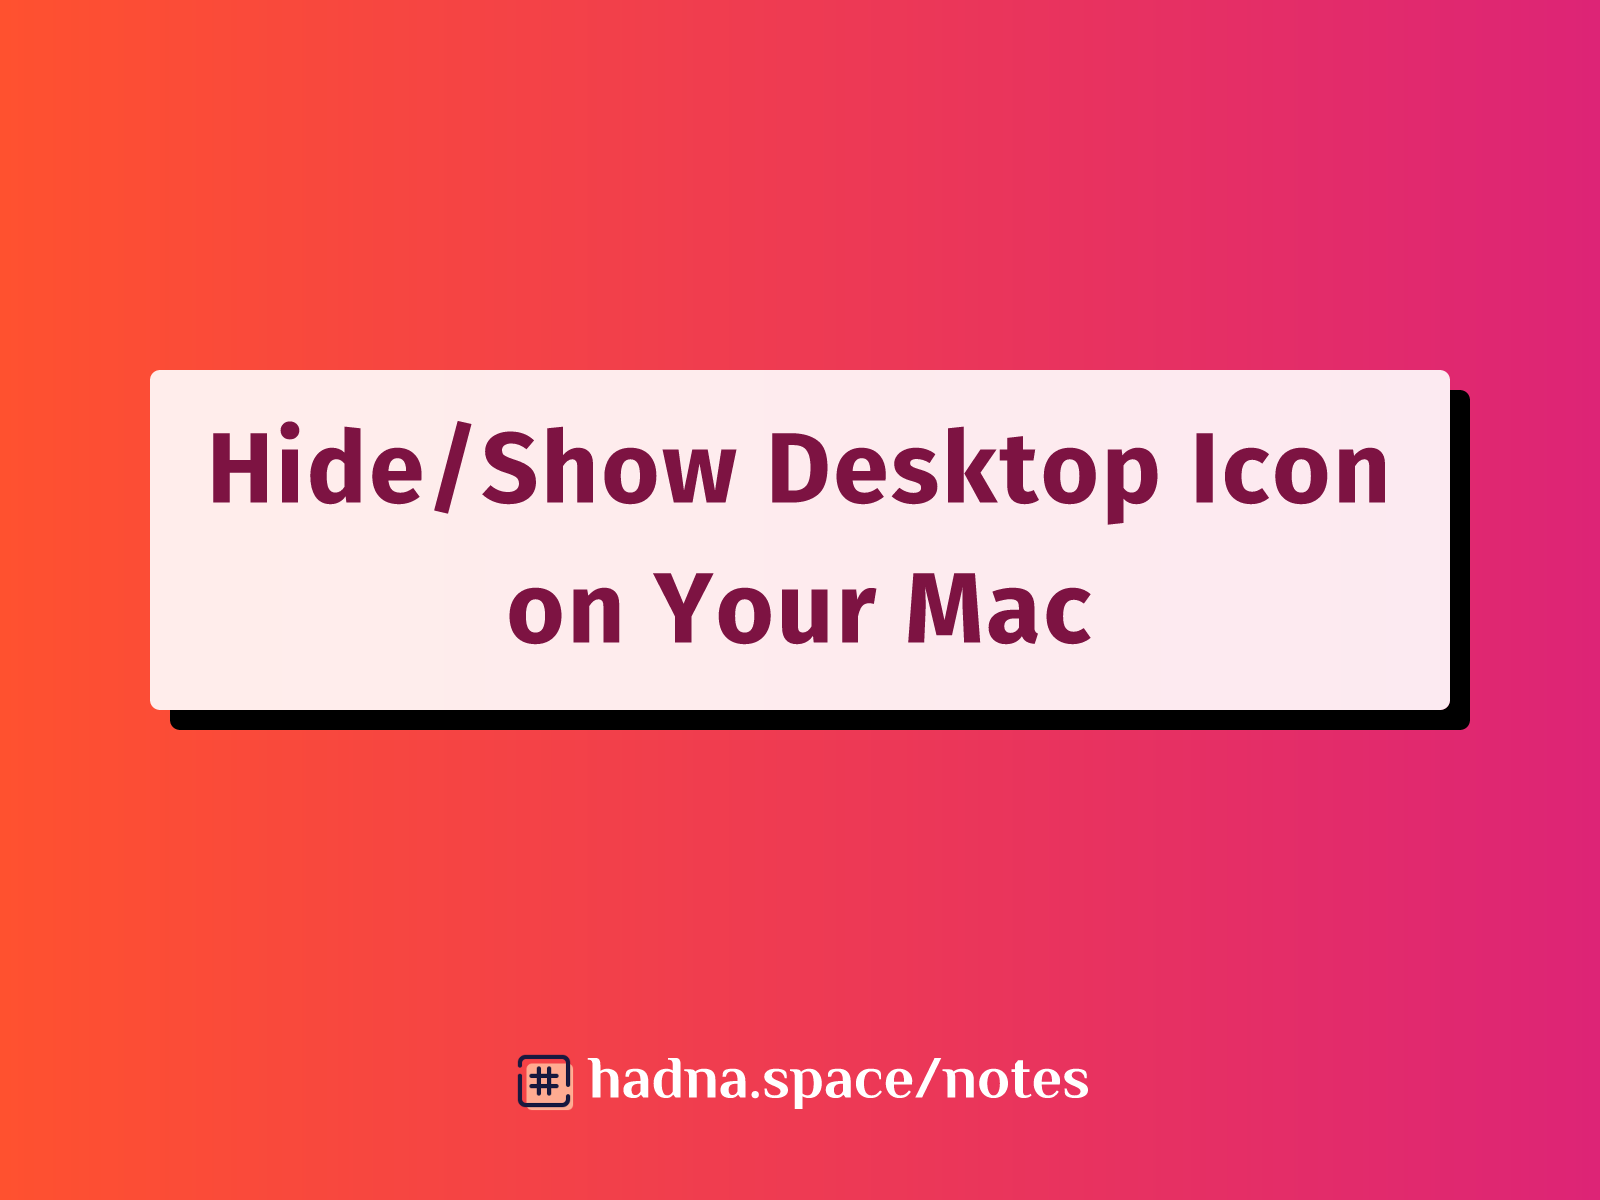 How To Remove or Hide Desktop Icon on Your Mac